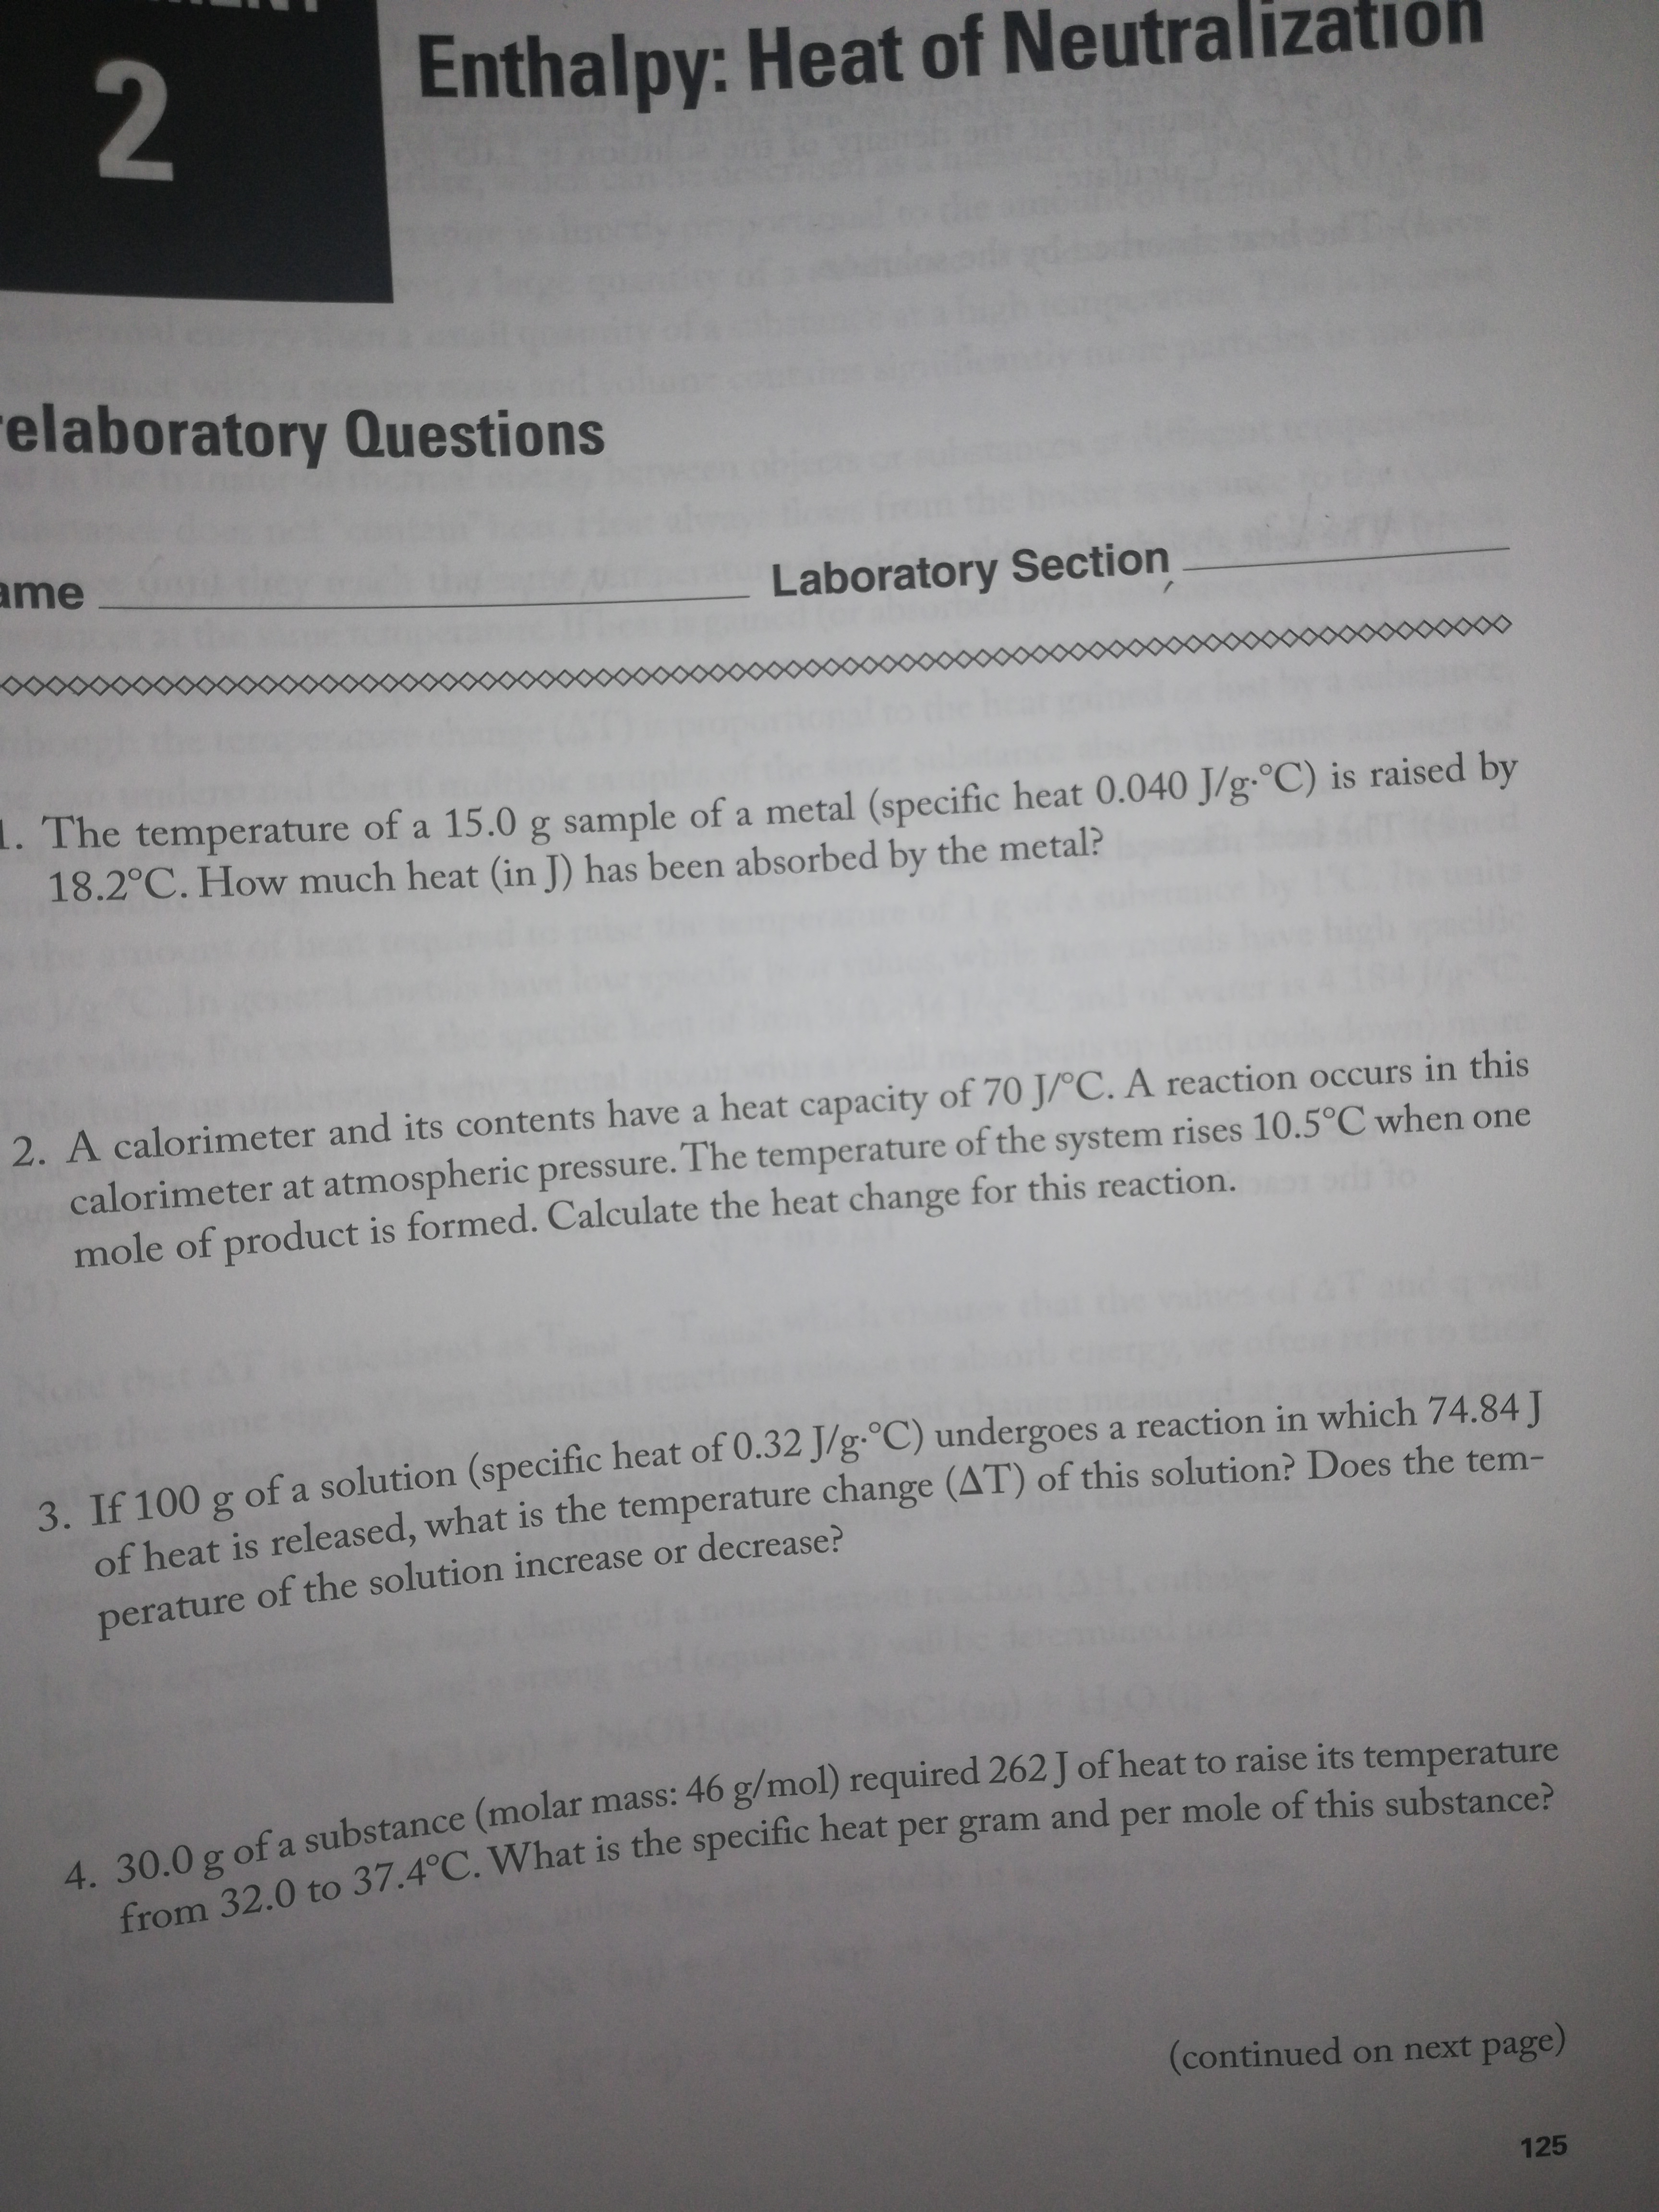 Enthalpy: Heat of Neutralization
relaboratory Questions
ame
Laboratory Section
the
8.
1. The temperature of a 15.0 g sample of a metal (specific heat 0.040 J/g-°C) is raised by
18.2°C. How much heat (in J) has been absorbed by the metal?
2. A calorimeter and its contents have a heat capacity of 70 J/°C. A reaction occurs in this
calorimeter at atmospheric pressure. The temperature of the system rises 10.5°C when one
mole of product is formed. Calculate the heat change for this reaction.
3. If 100 g of a solution (specific heat of 0.32 J/g-°C) undergoes a reaction in which 74.84I
of heat is released, what is the temperature change (AT) of this solution? Does the tem-
perature of the solution increase or decrease?
4. 30.0 g of a substance (molar mass: 46 g/mol) required 262 J of heat to raise its temperature
from 32.0 to 37.4°C. What is the specific heat per gram and per mole of this substance?
(continued on next page)
125
